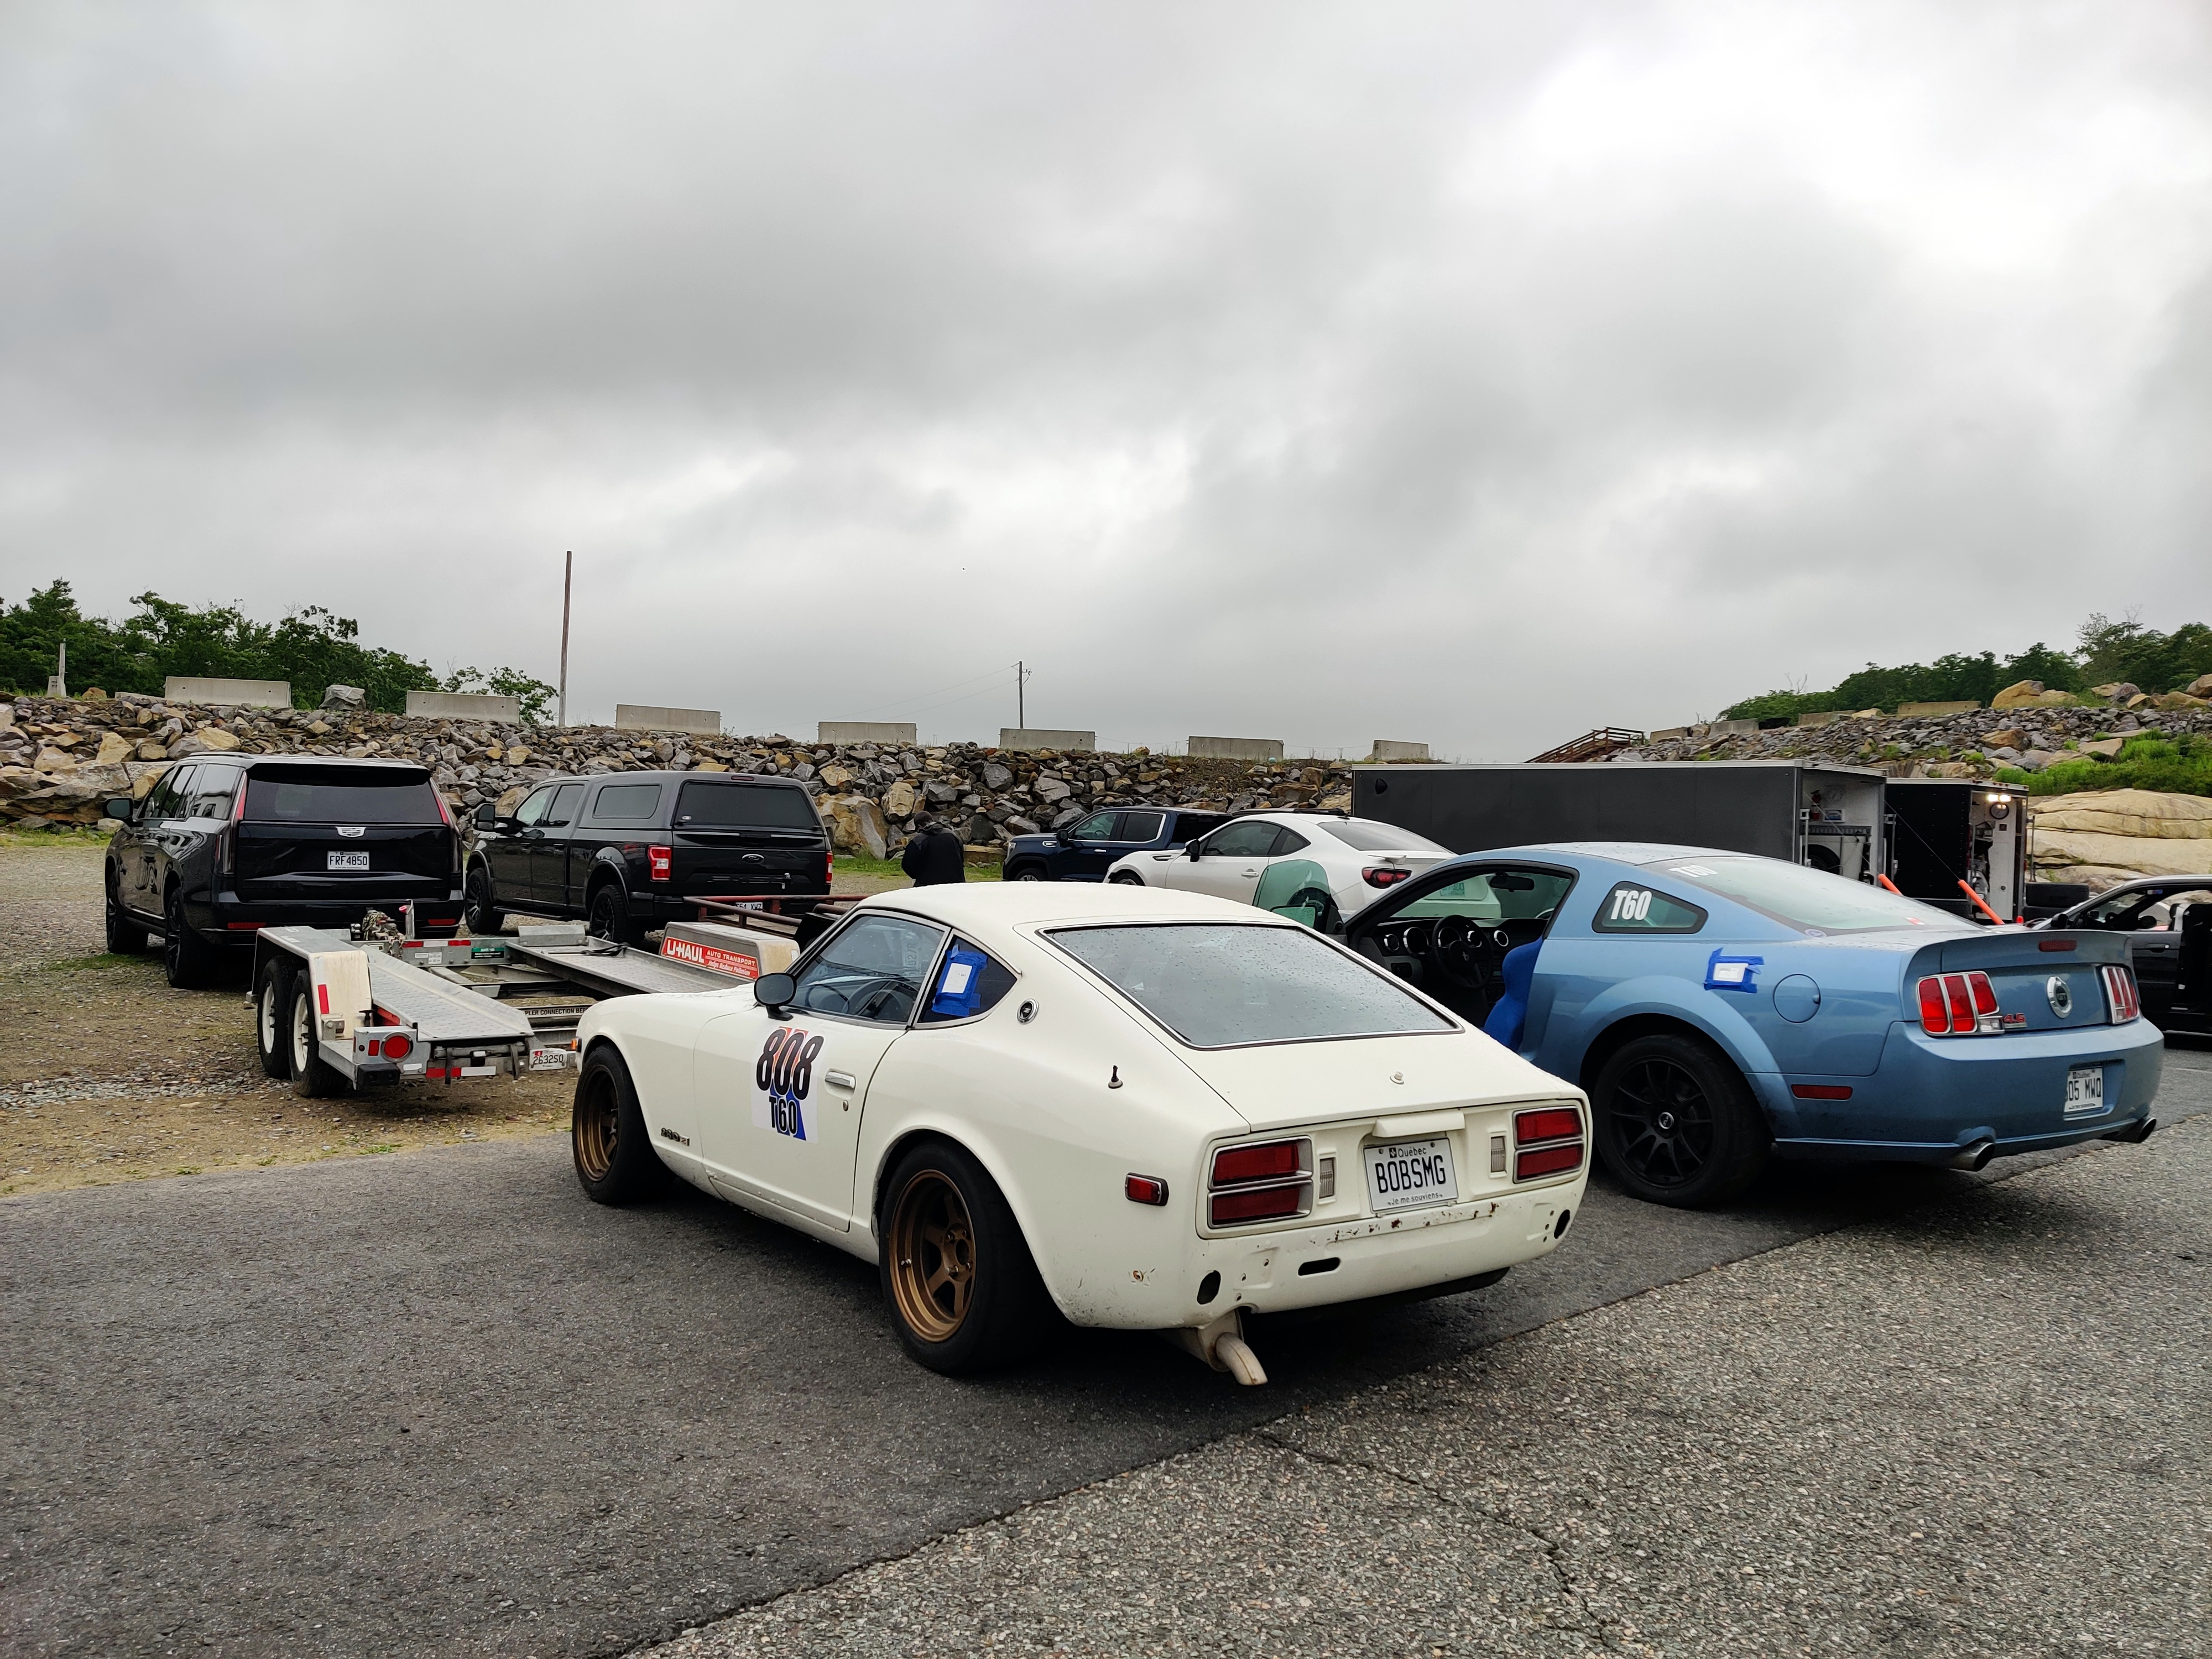 A 1978 Datsun 280Z rests on pavement behind a trailer and a black 2023 Cadillac Escalade